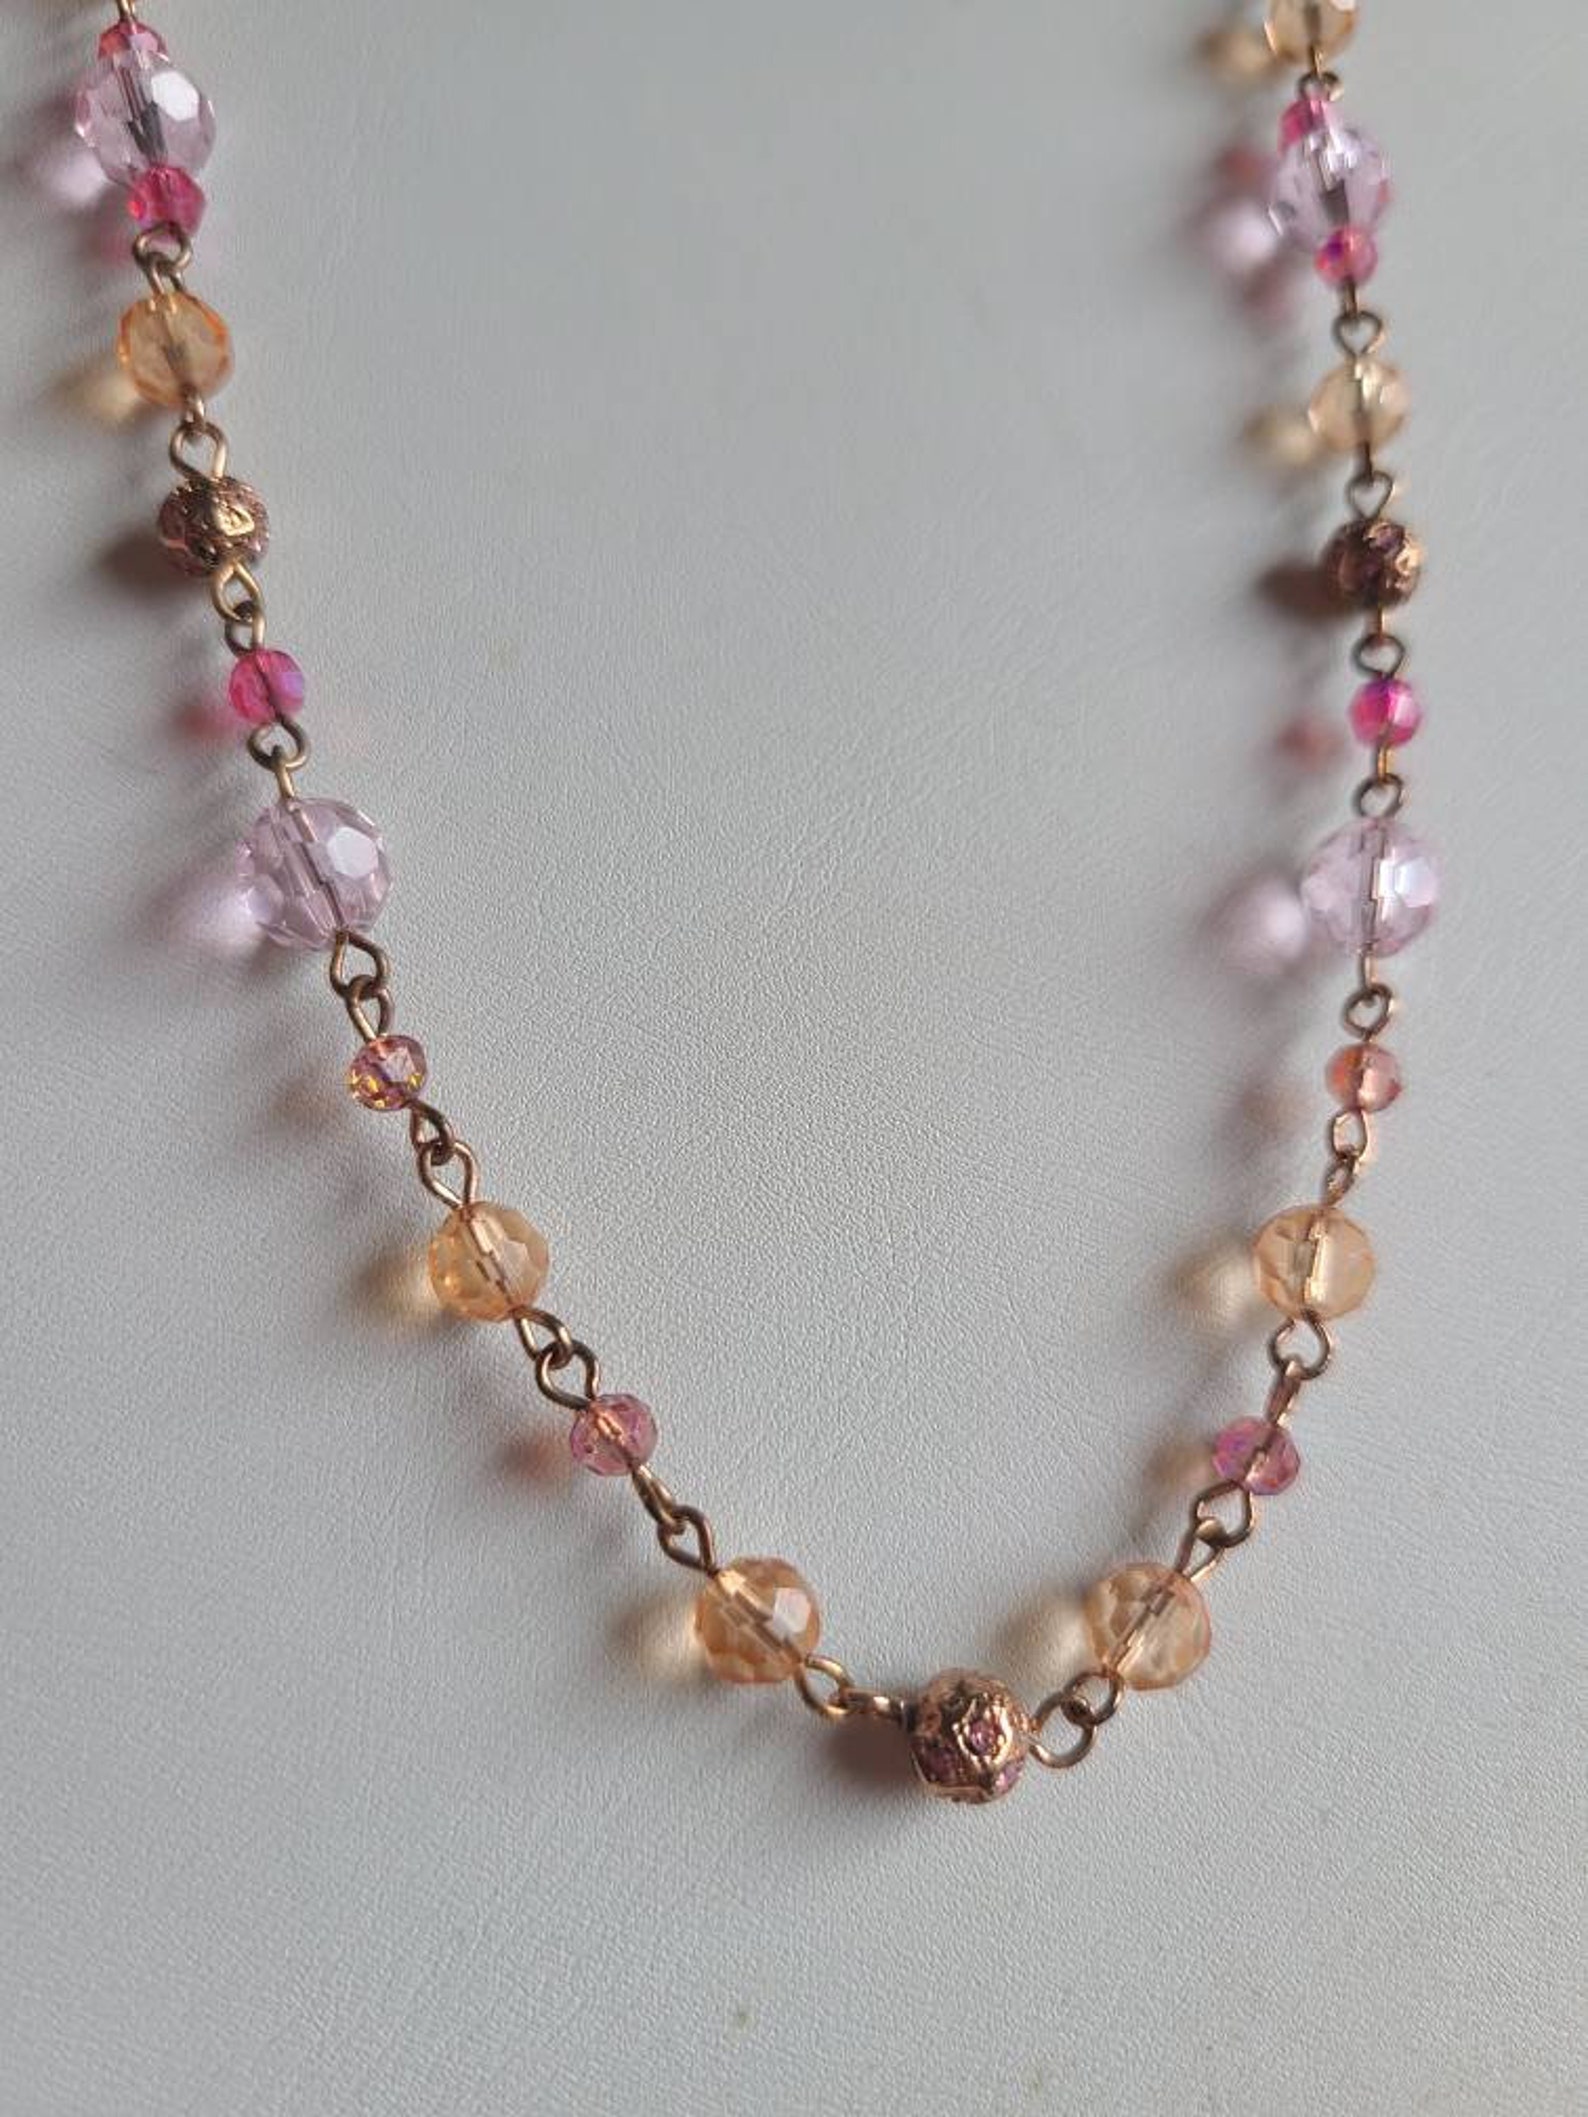 Beautiful Pink Beaded Necklace | Etsy